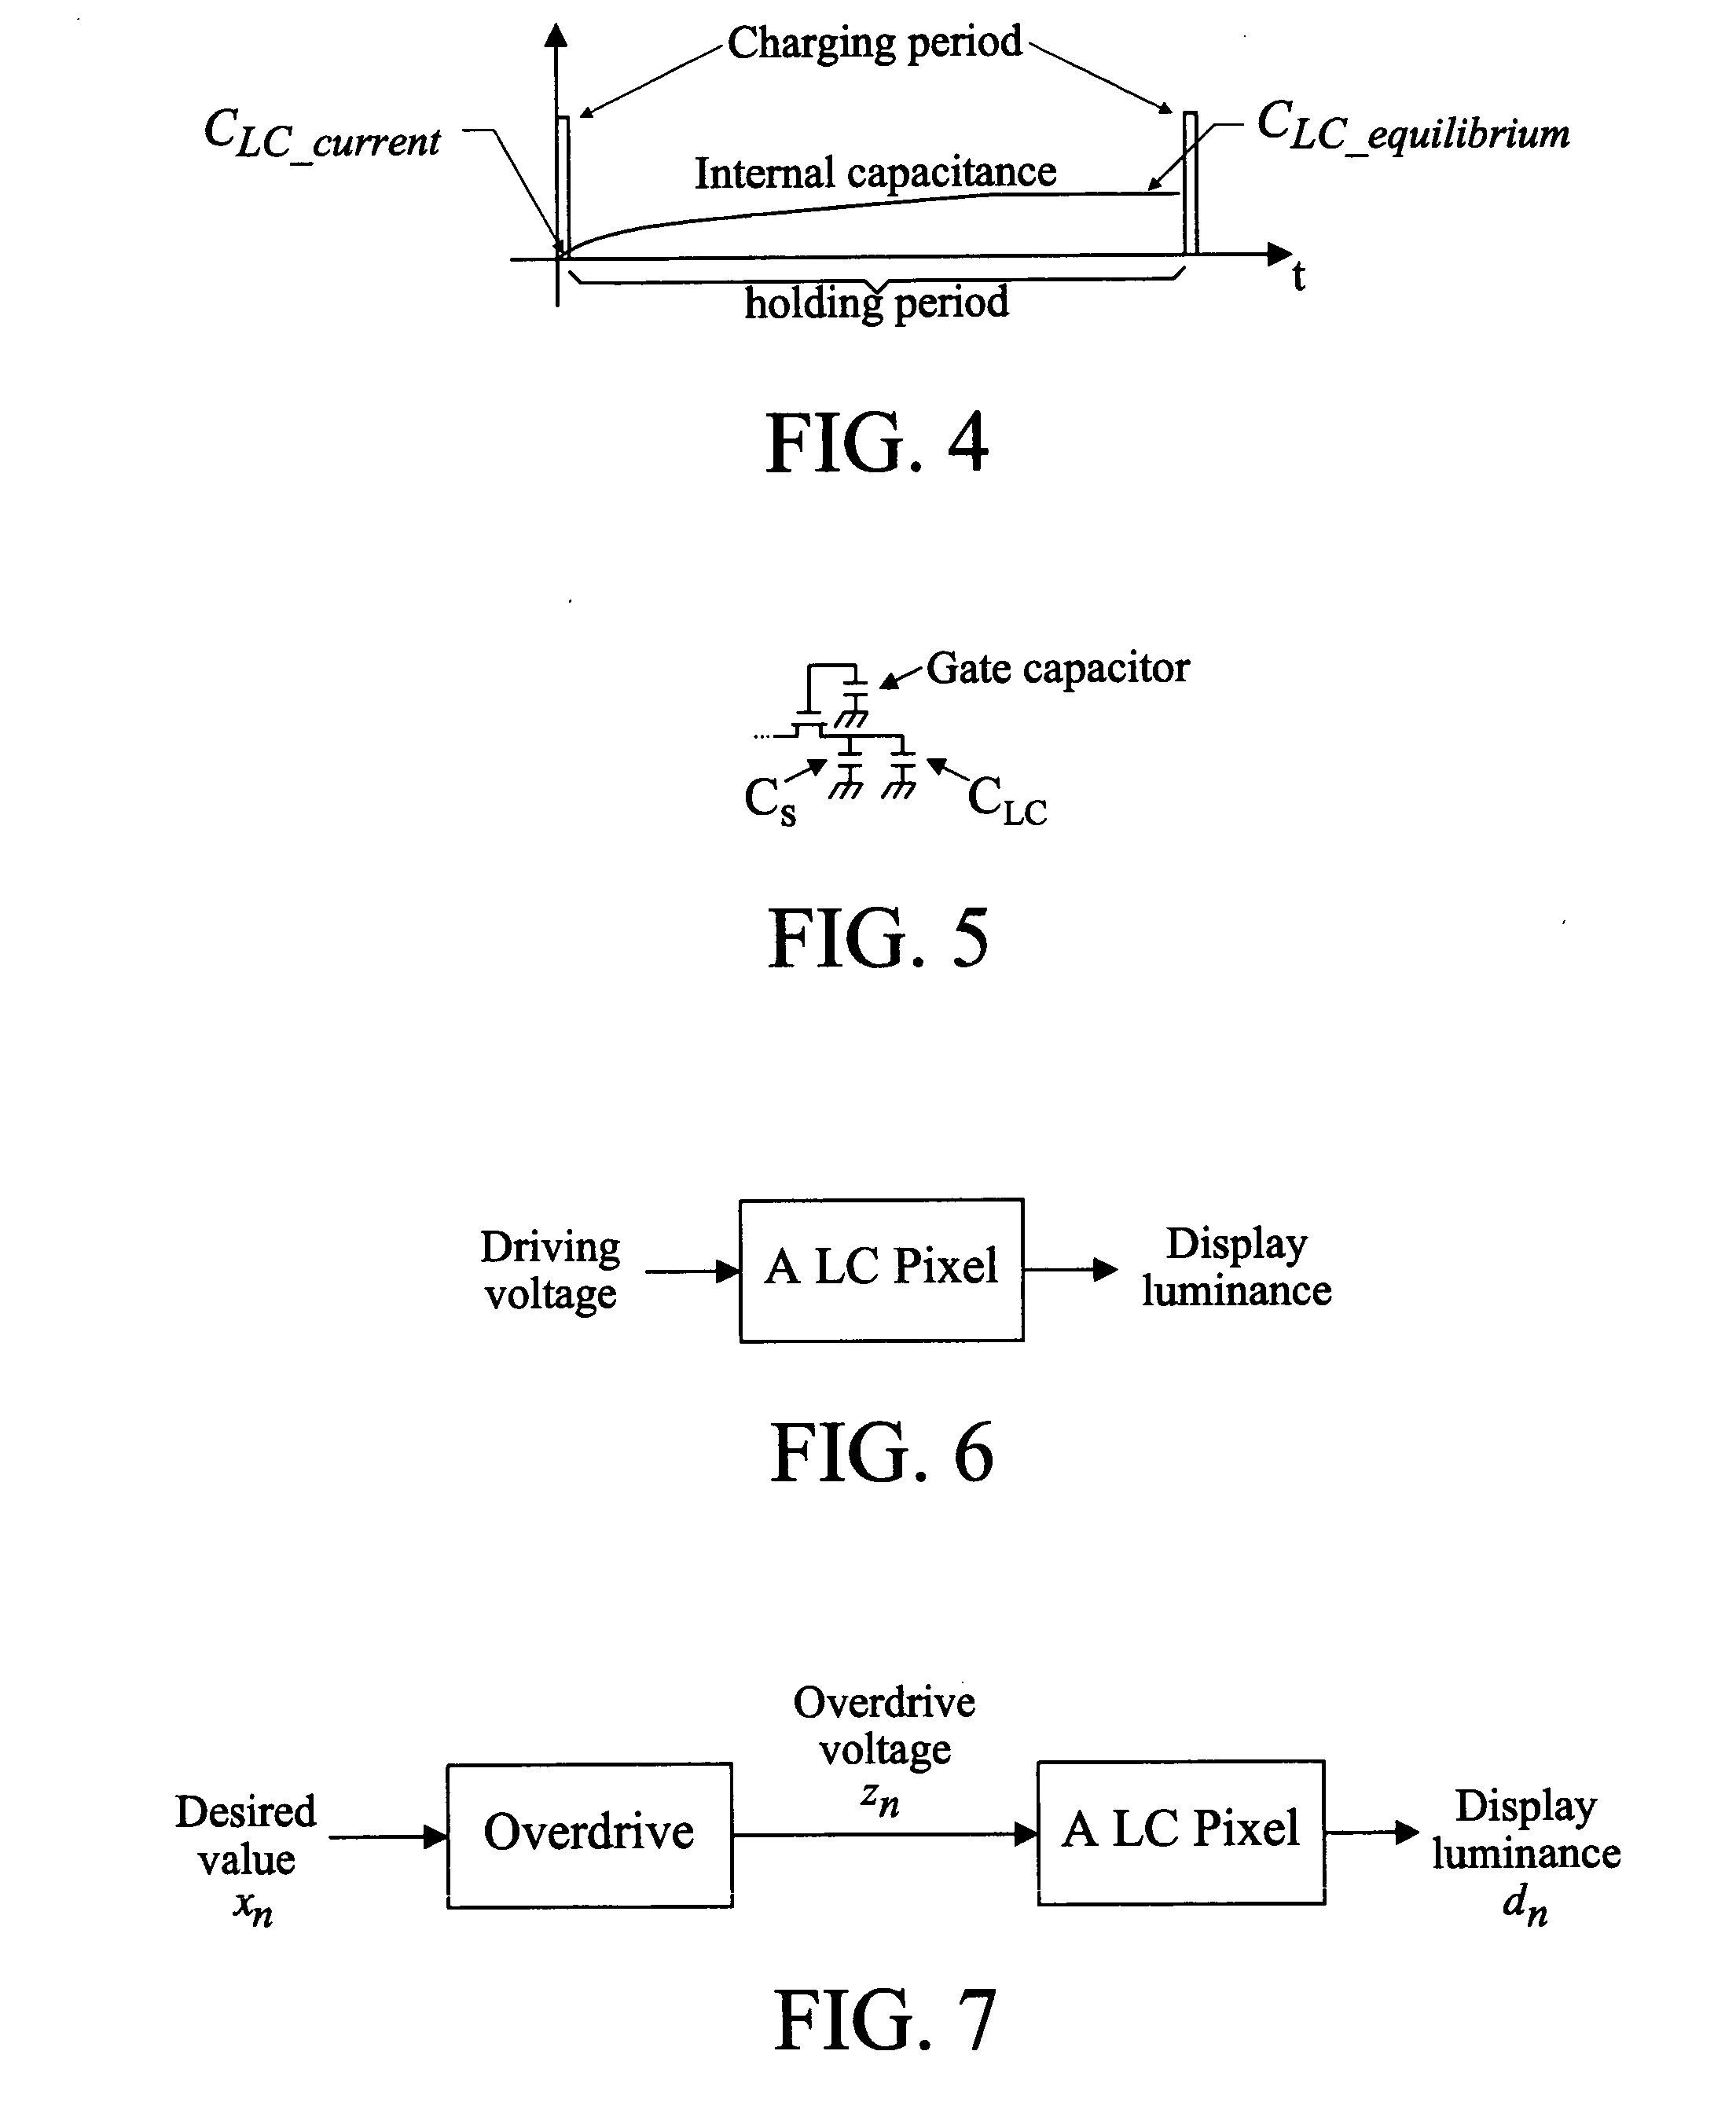 System for displaying images on a display